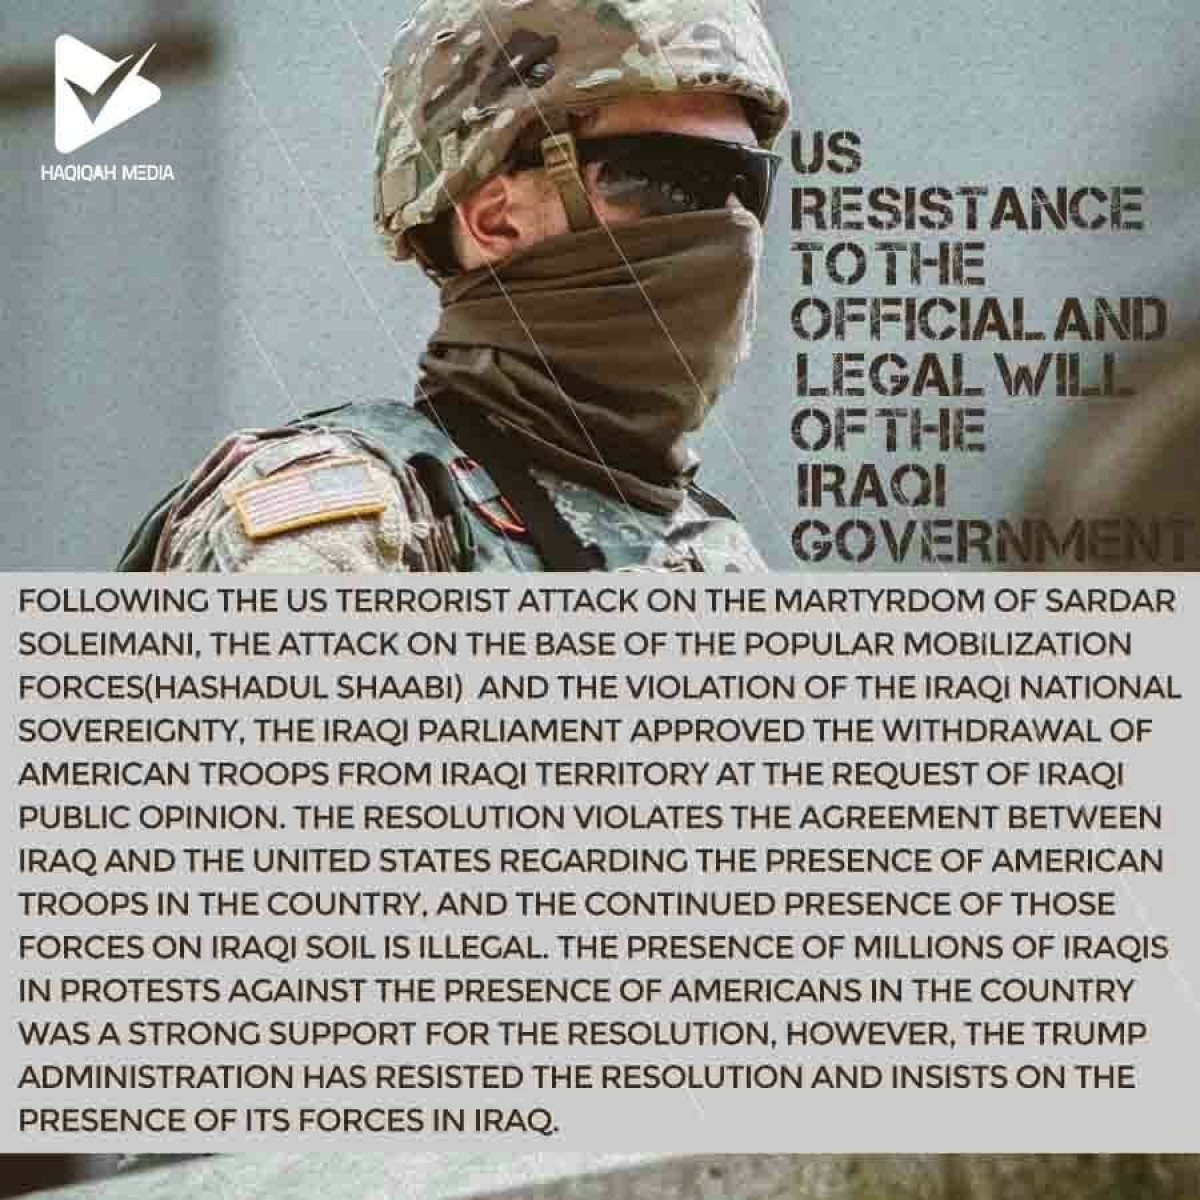 US RESIDTANCE TO THE OFFICIAL AND LEGAL WILL OF THE IRAQI GOVERNMENT